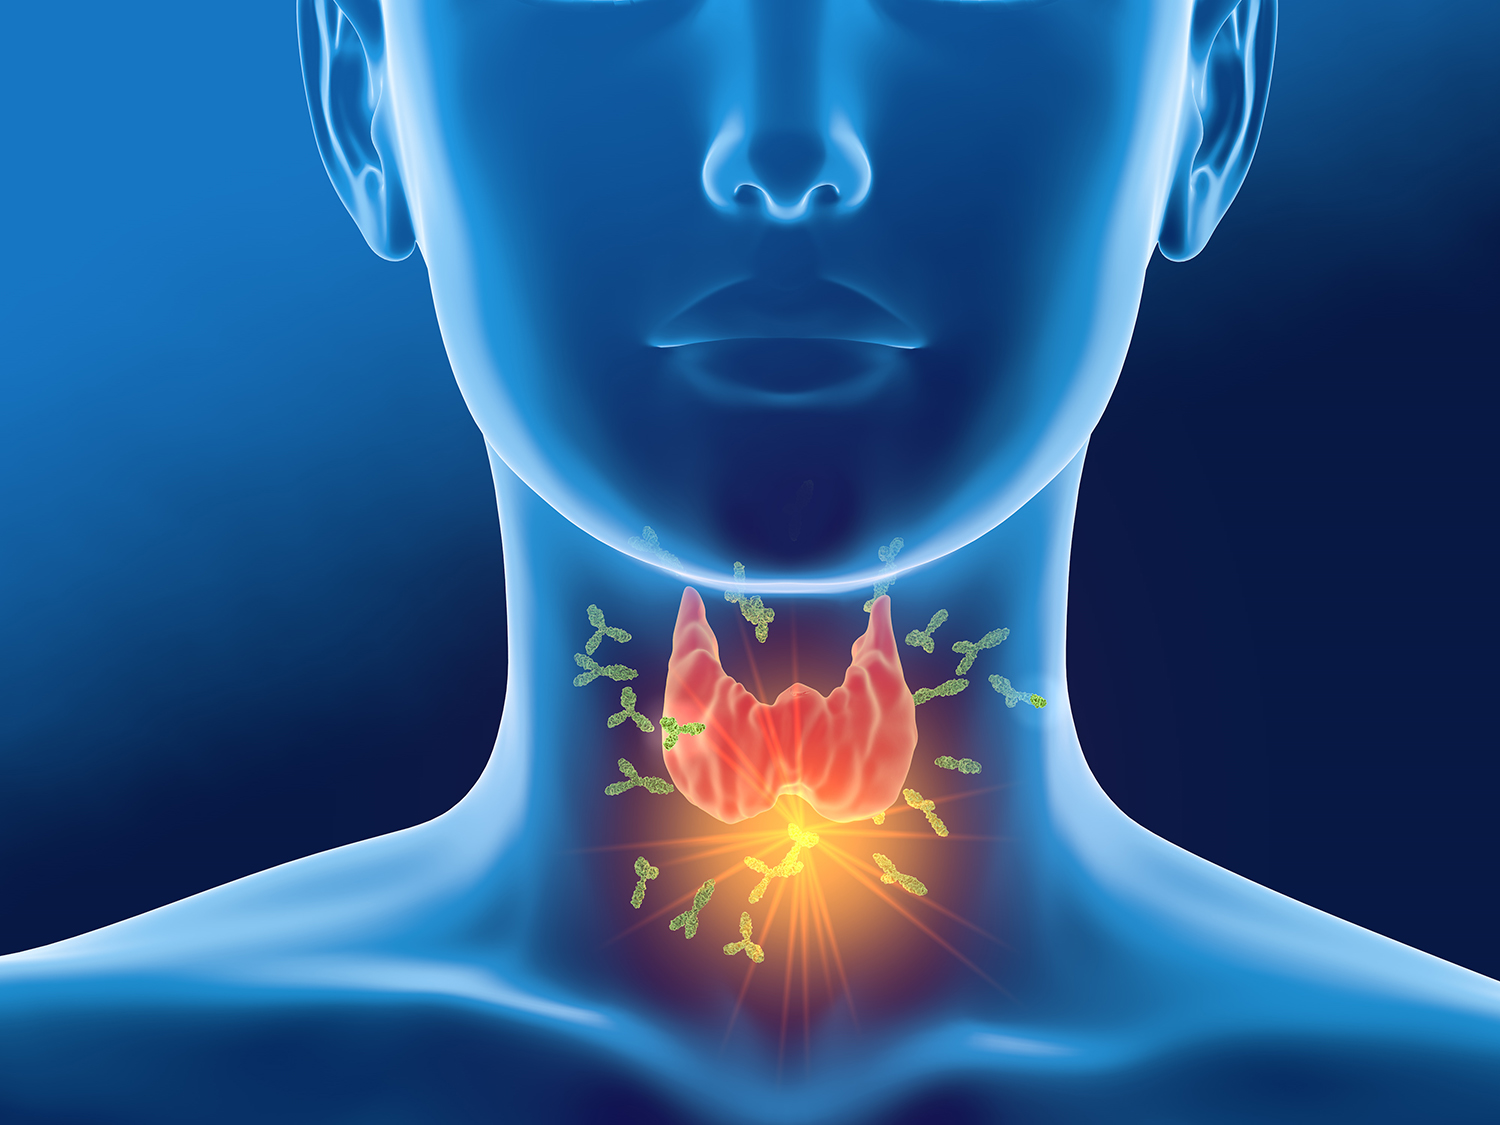 Medically 3D illustration showing antibodies attacking thyroid gland of a woman.